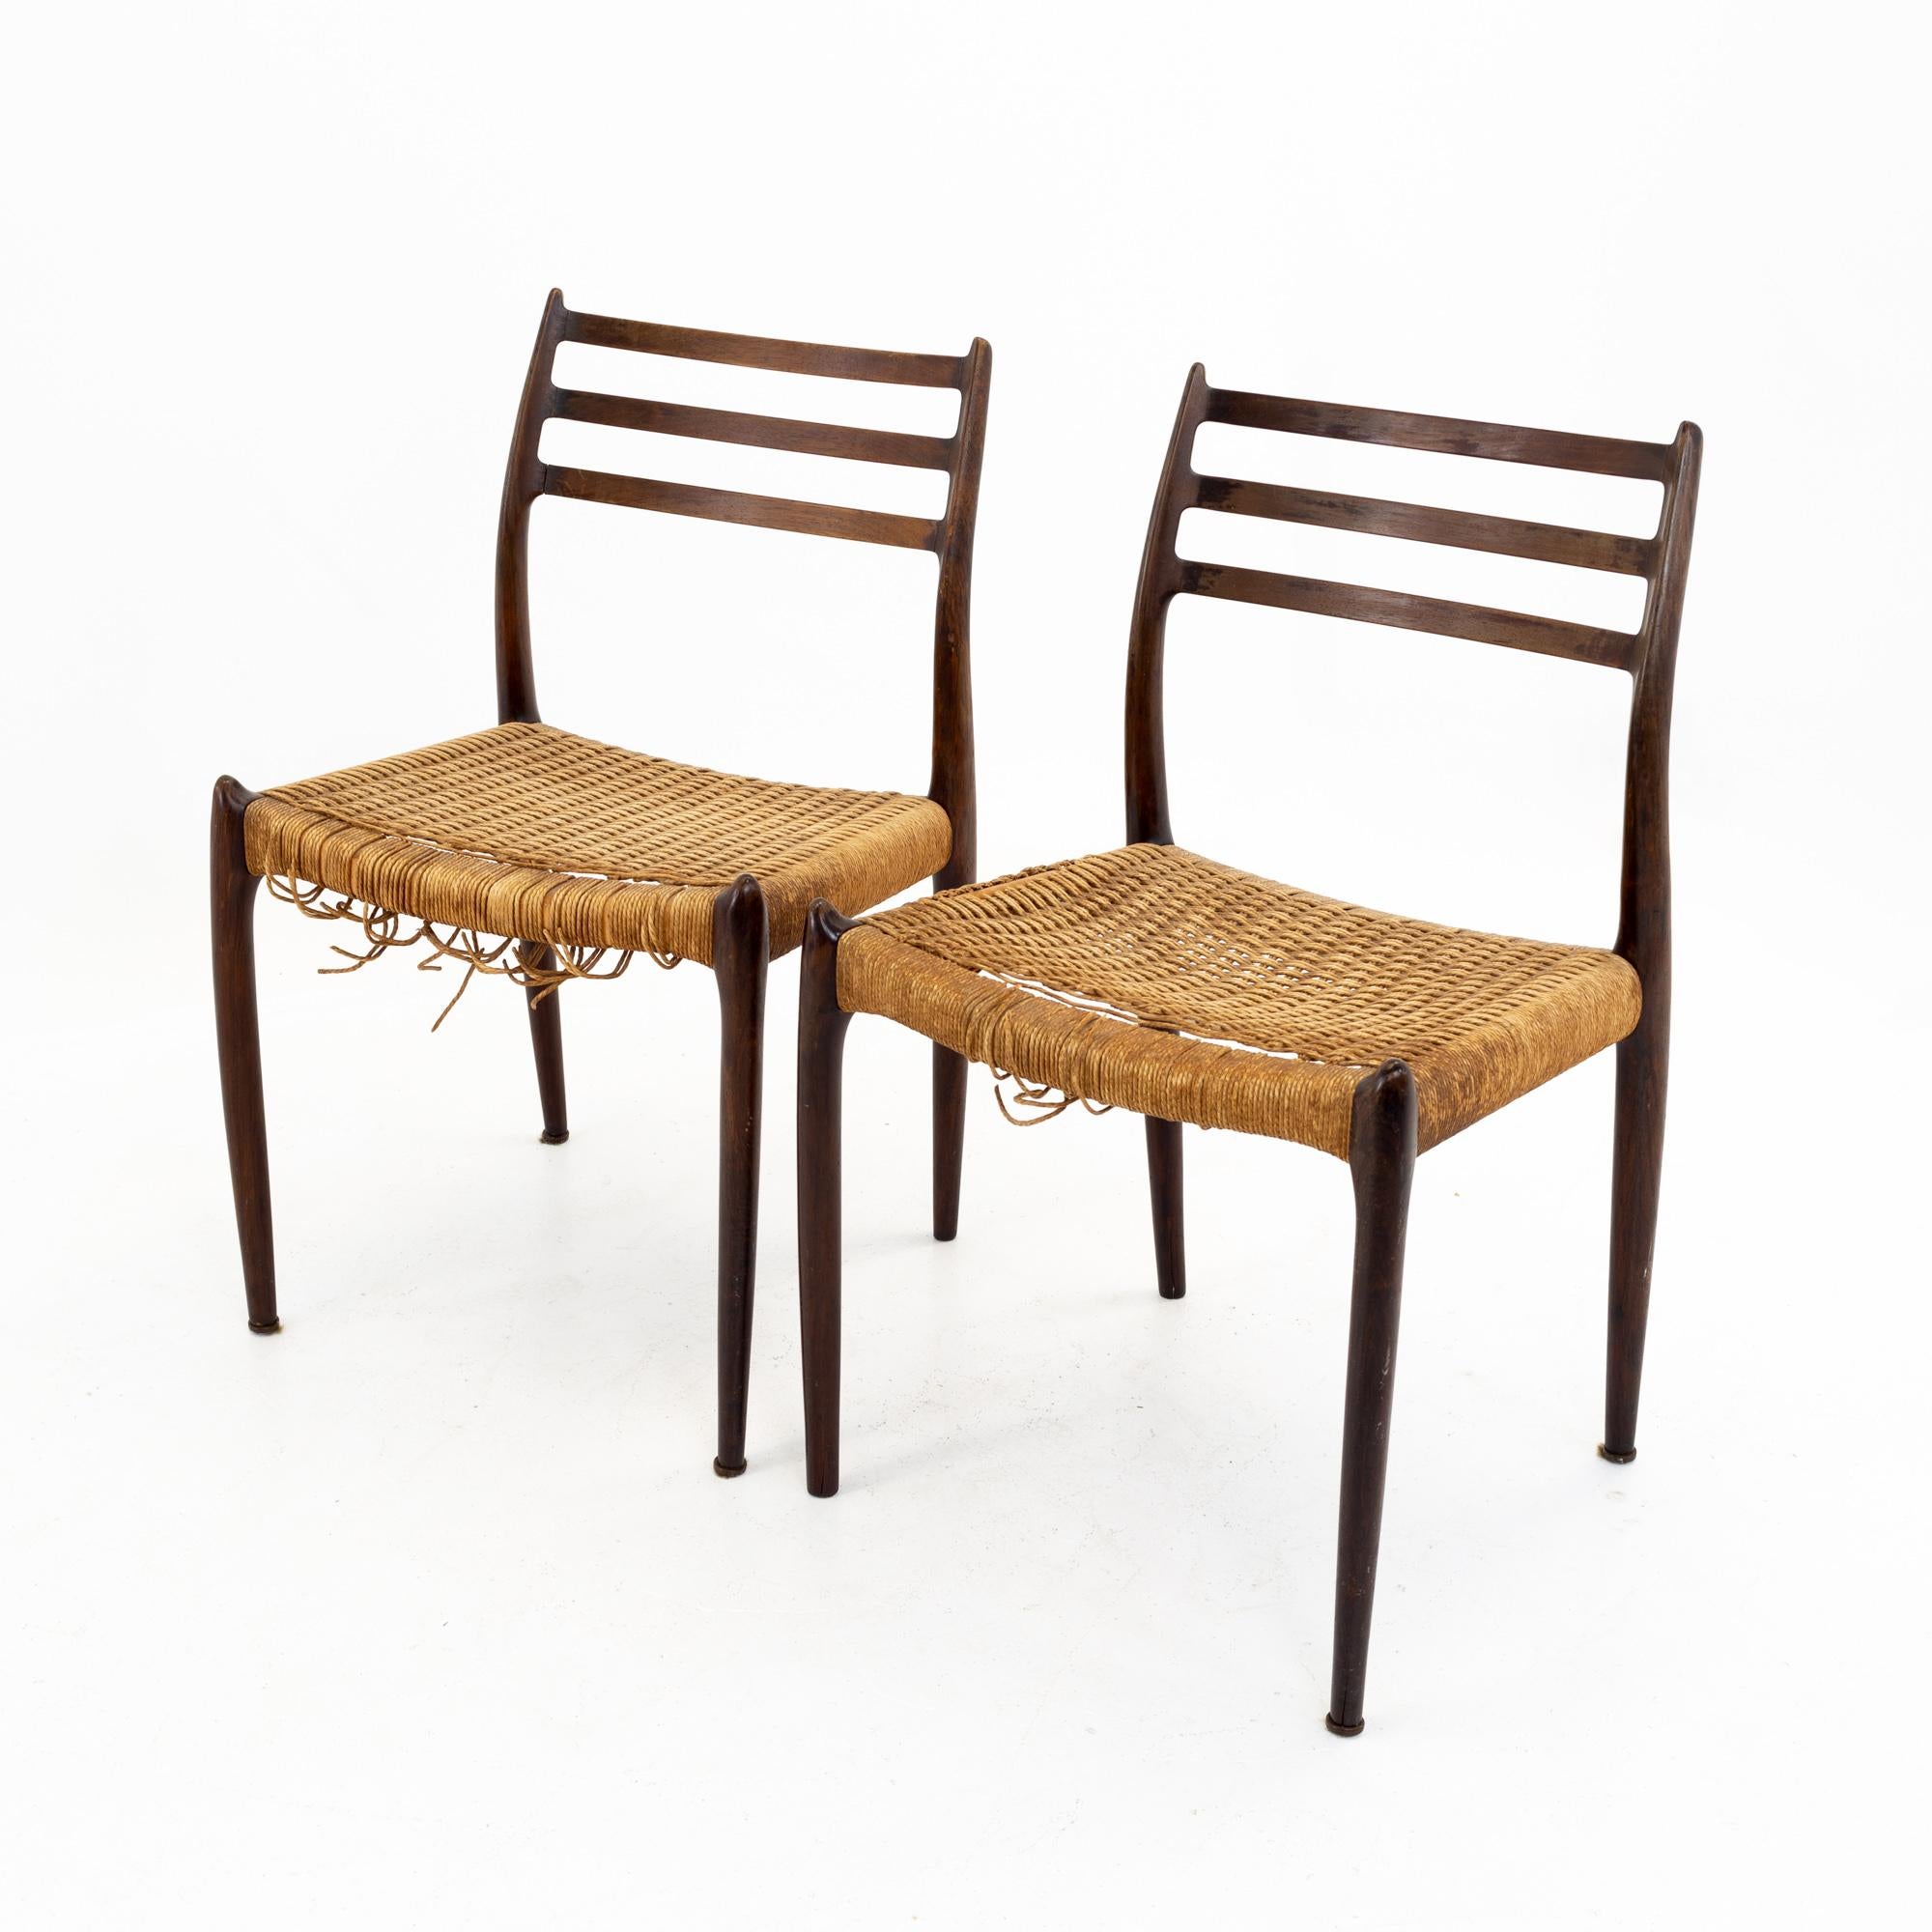 Niels Otto Moller mid century Danish rosewood dining chairs - pair
These chairs are 19.75 wide x 17.5 deep x 32.25 high, and a seat height of18.75 inches

All pieces of furniture can be had in what we call restored vintage condition. That means